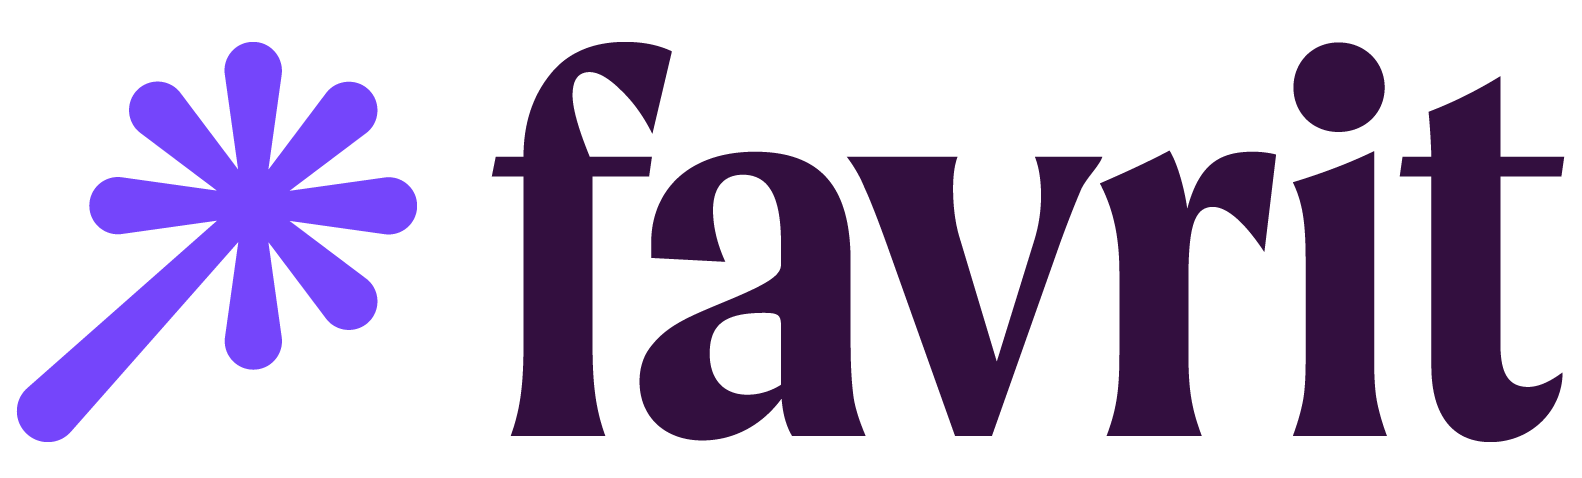 Logo that displays a purple wand with the text 